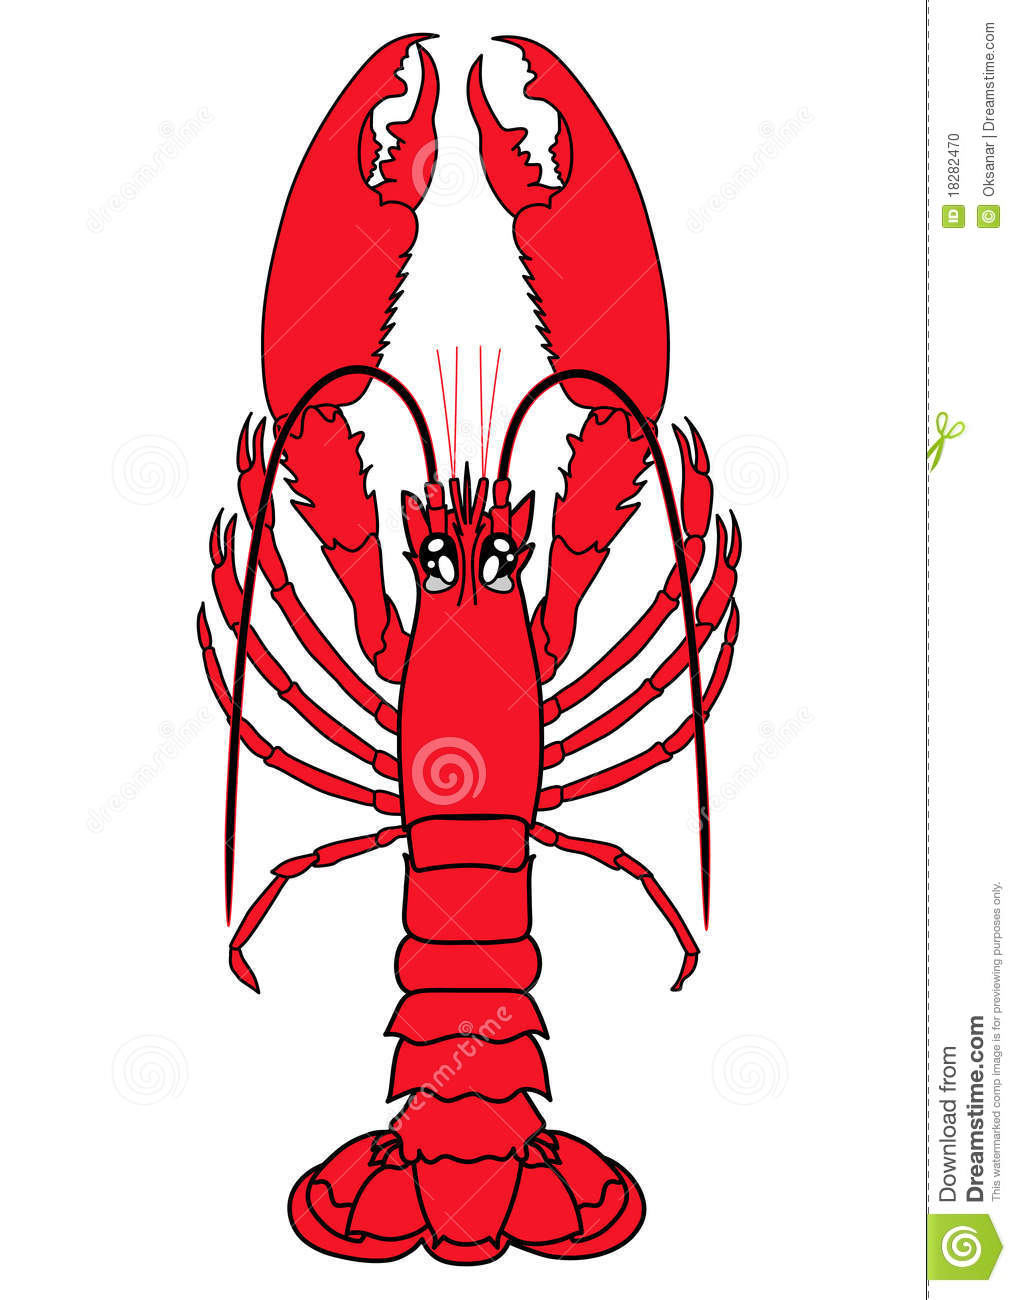 Lobster Clip Art Images   Clipart Panda   Free Clipart Images